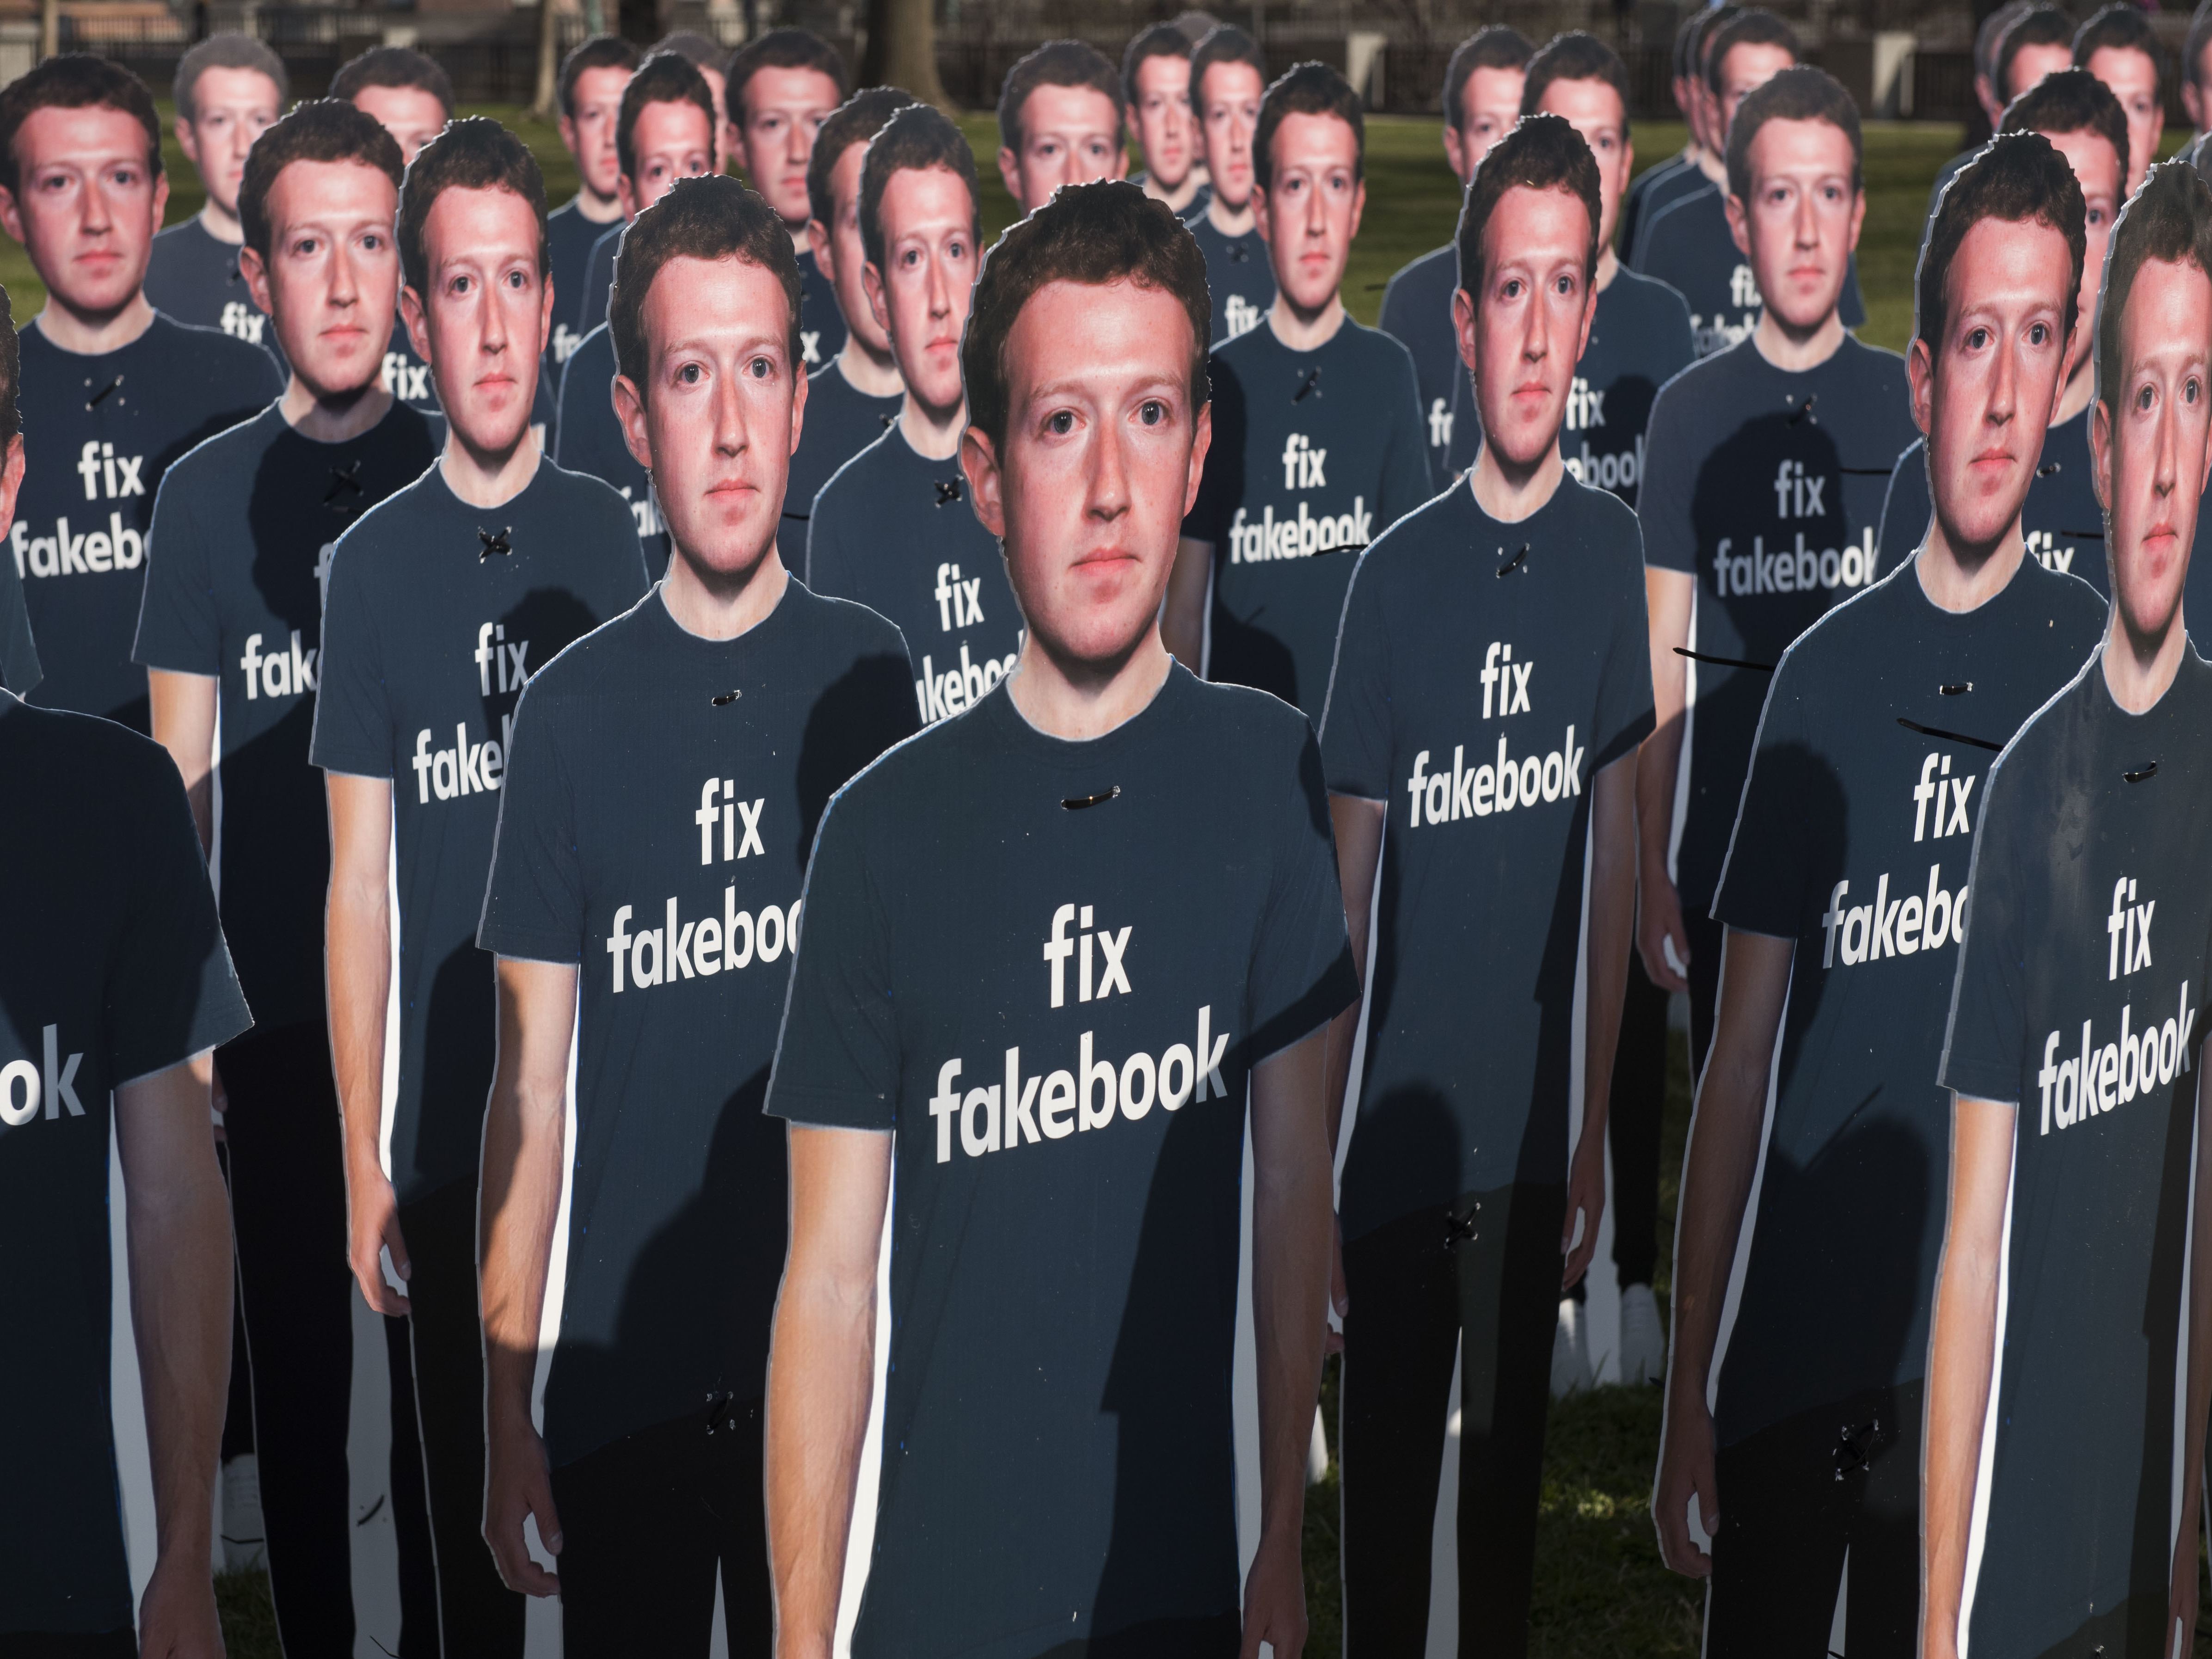 Cardboard cutouts of Facebook founder and CEO Mark Zuckerberg stand outside the U.S. Capitol in Washington as he testified before a Senate panel last week. (Photo by Kevin Wolf/Associated Press)